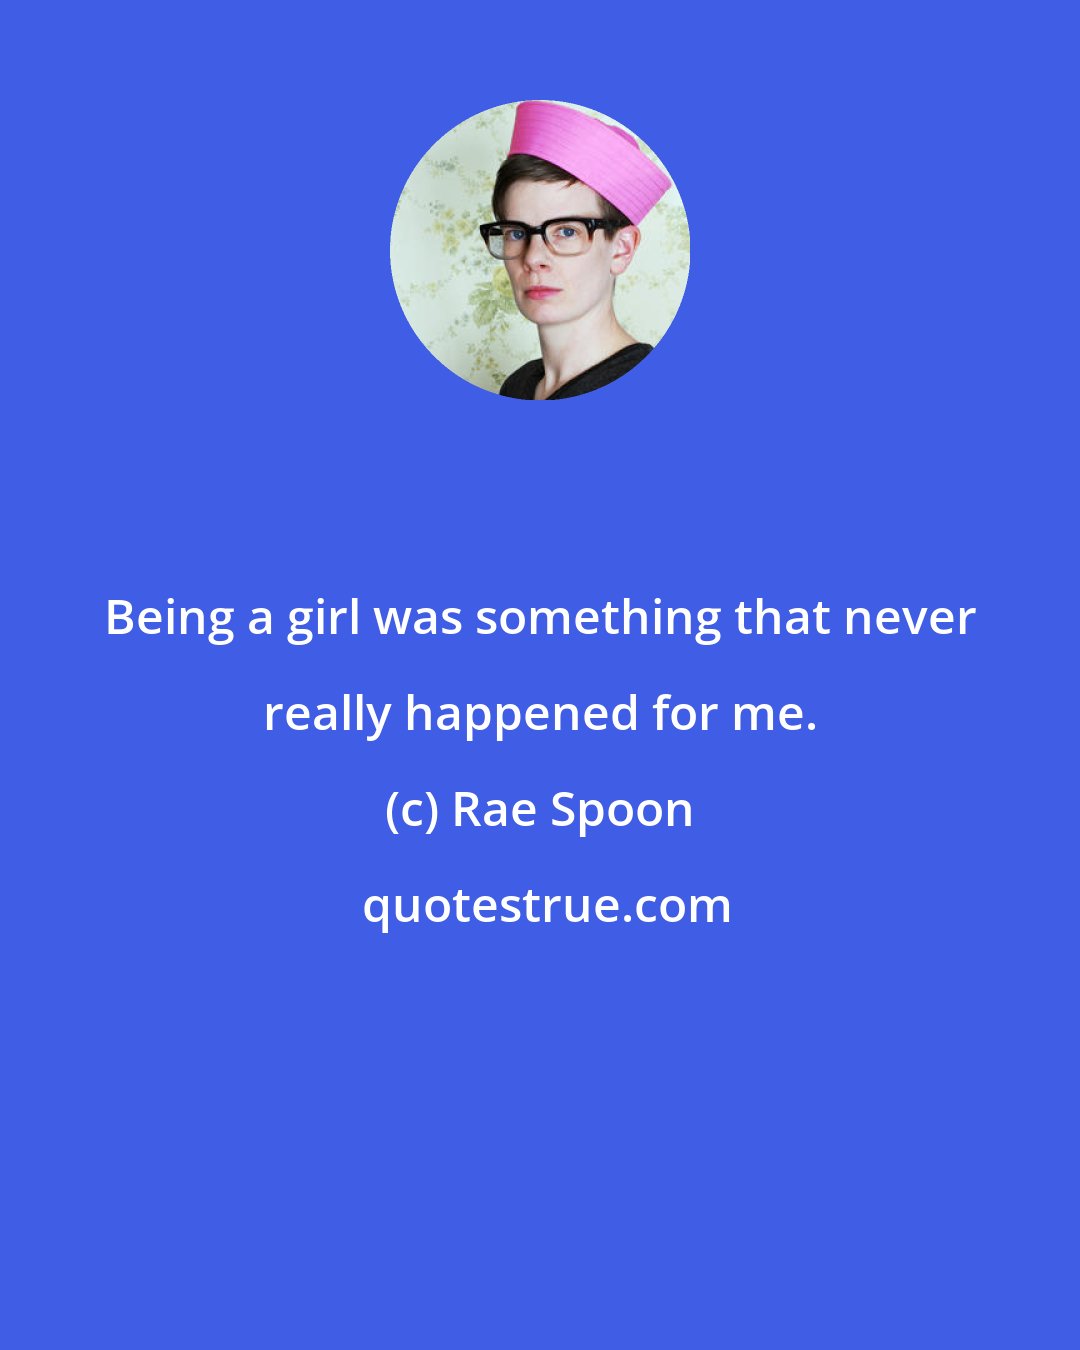 Rae Spoon: Being a girl was something that never really happened for me.